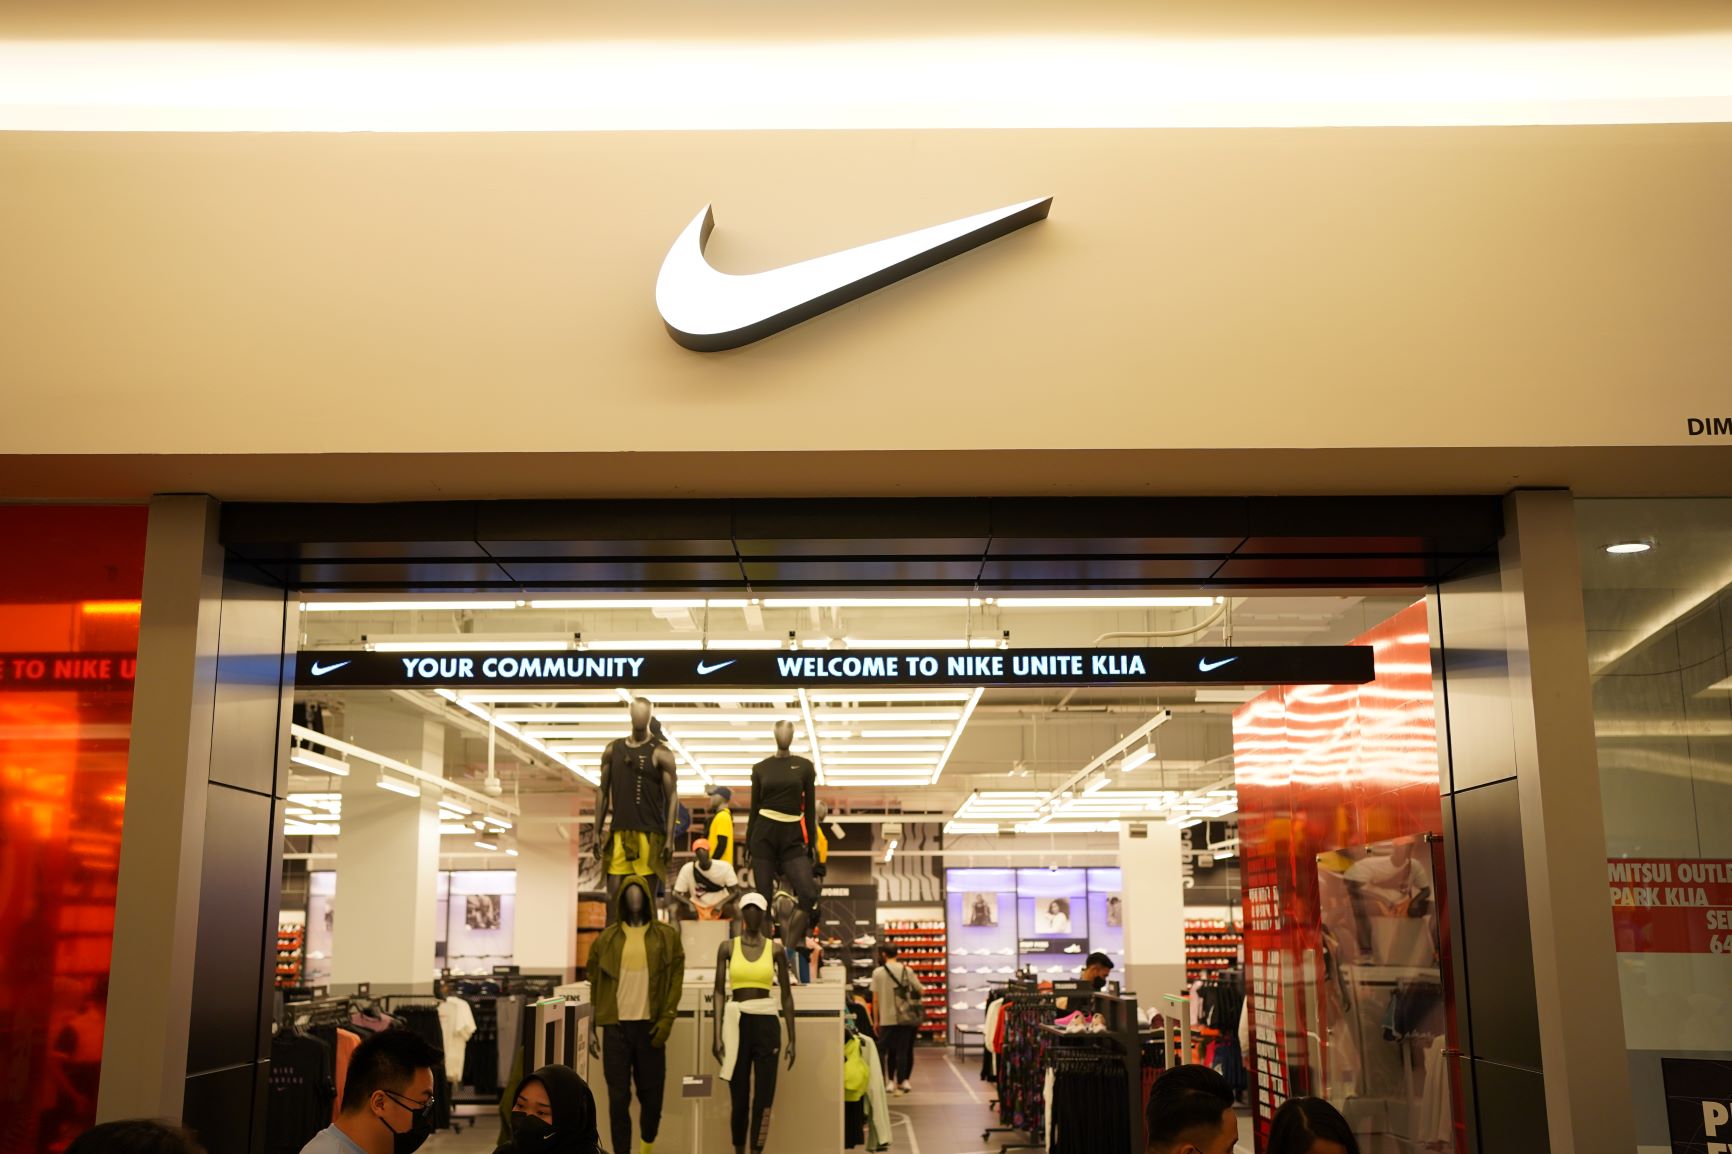 mitsui-outlet-park-klia-launches-phase-3-expansion-nike-front